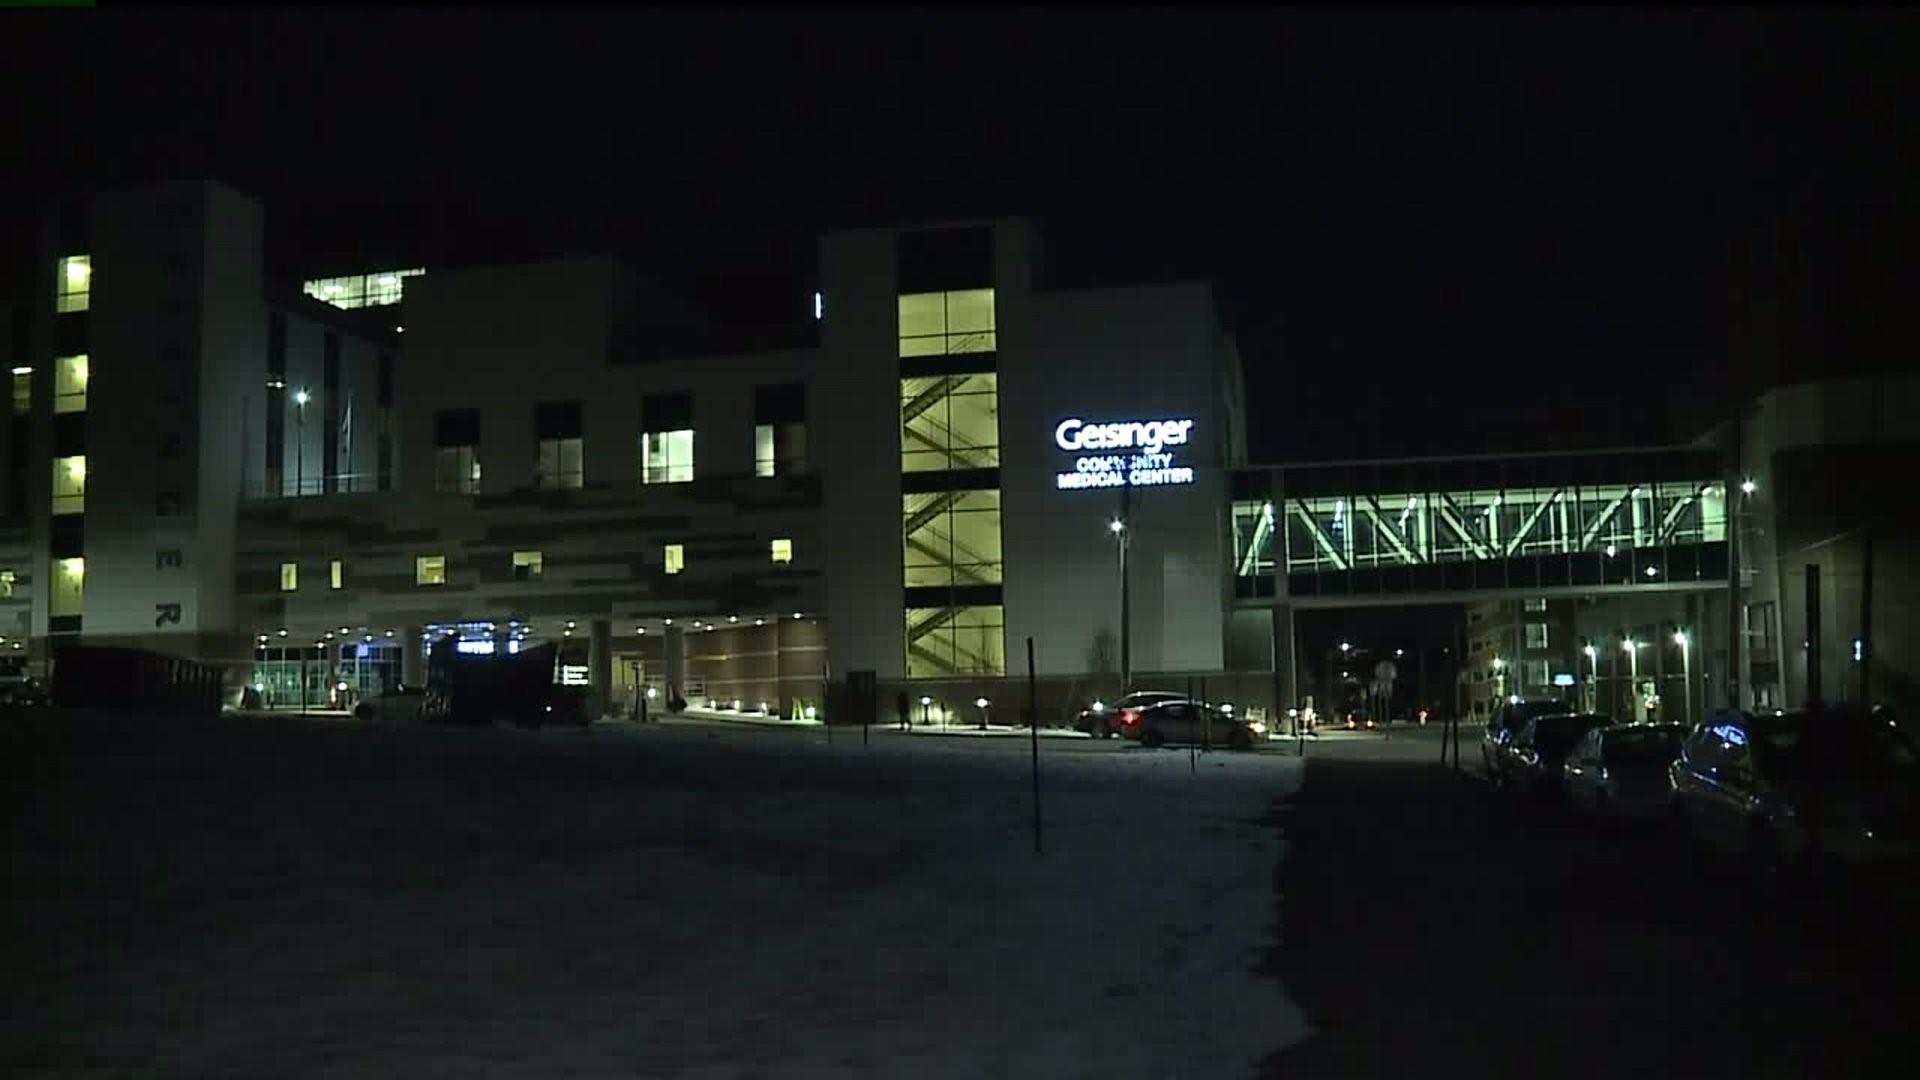 Geisinger-CMC Put on Lockdown After Reported Threats